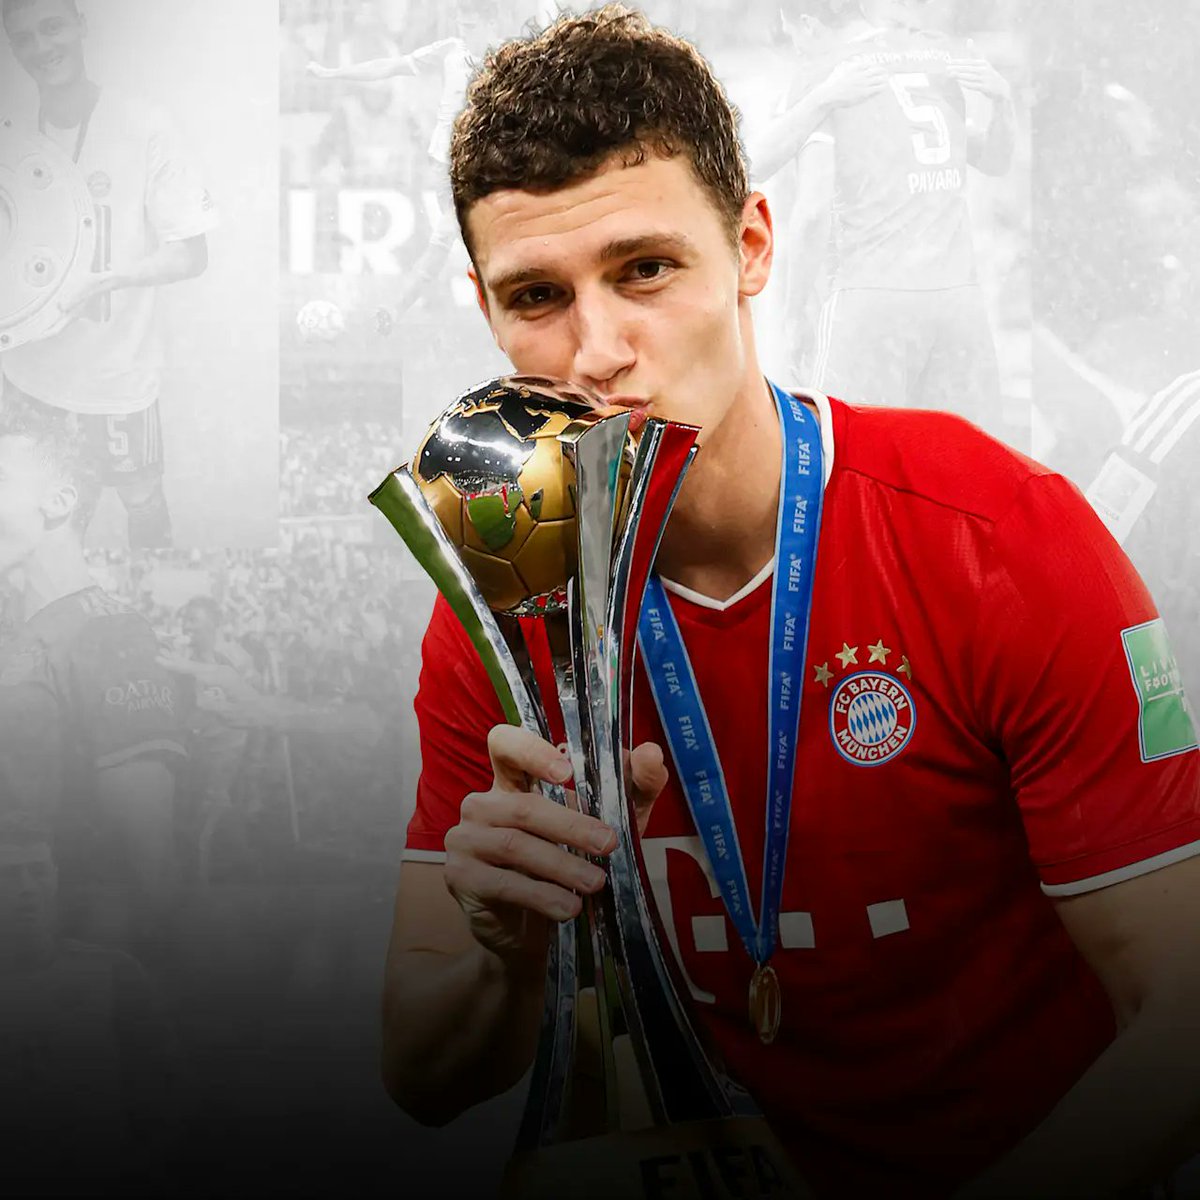 Jan-Christian Dreesen: 'Merci Benji! We would like to thank Benjamin Pavard for four extremely successful years together. He was a very important part of the team during our historic sextuple season, especially since he scored the goal of the night in the Club World Cup final. We